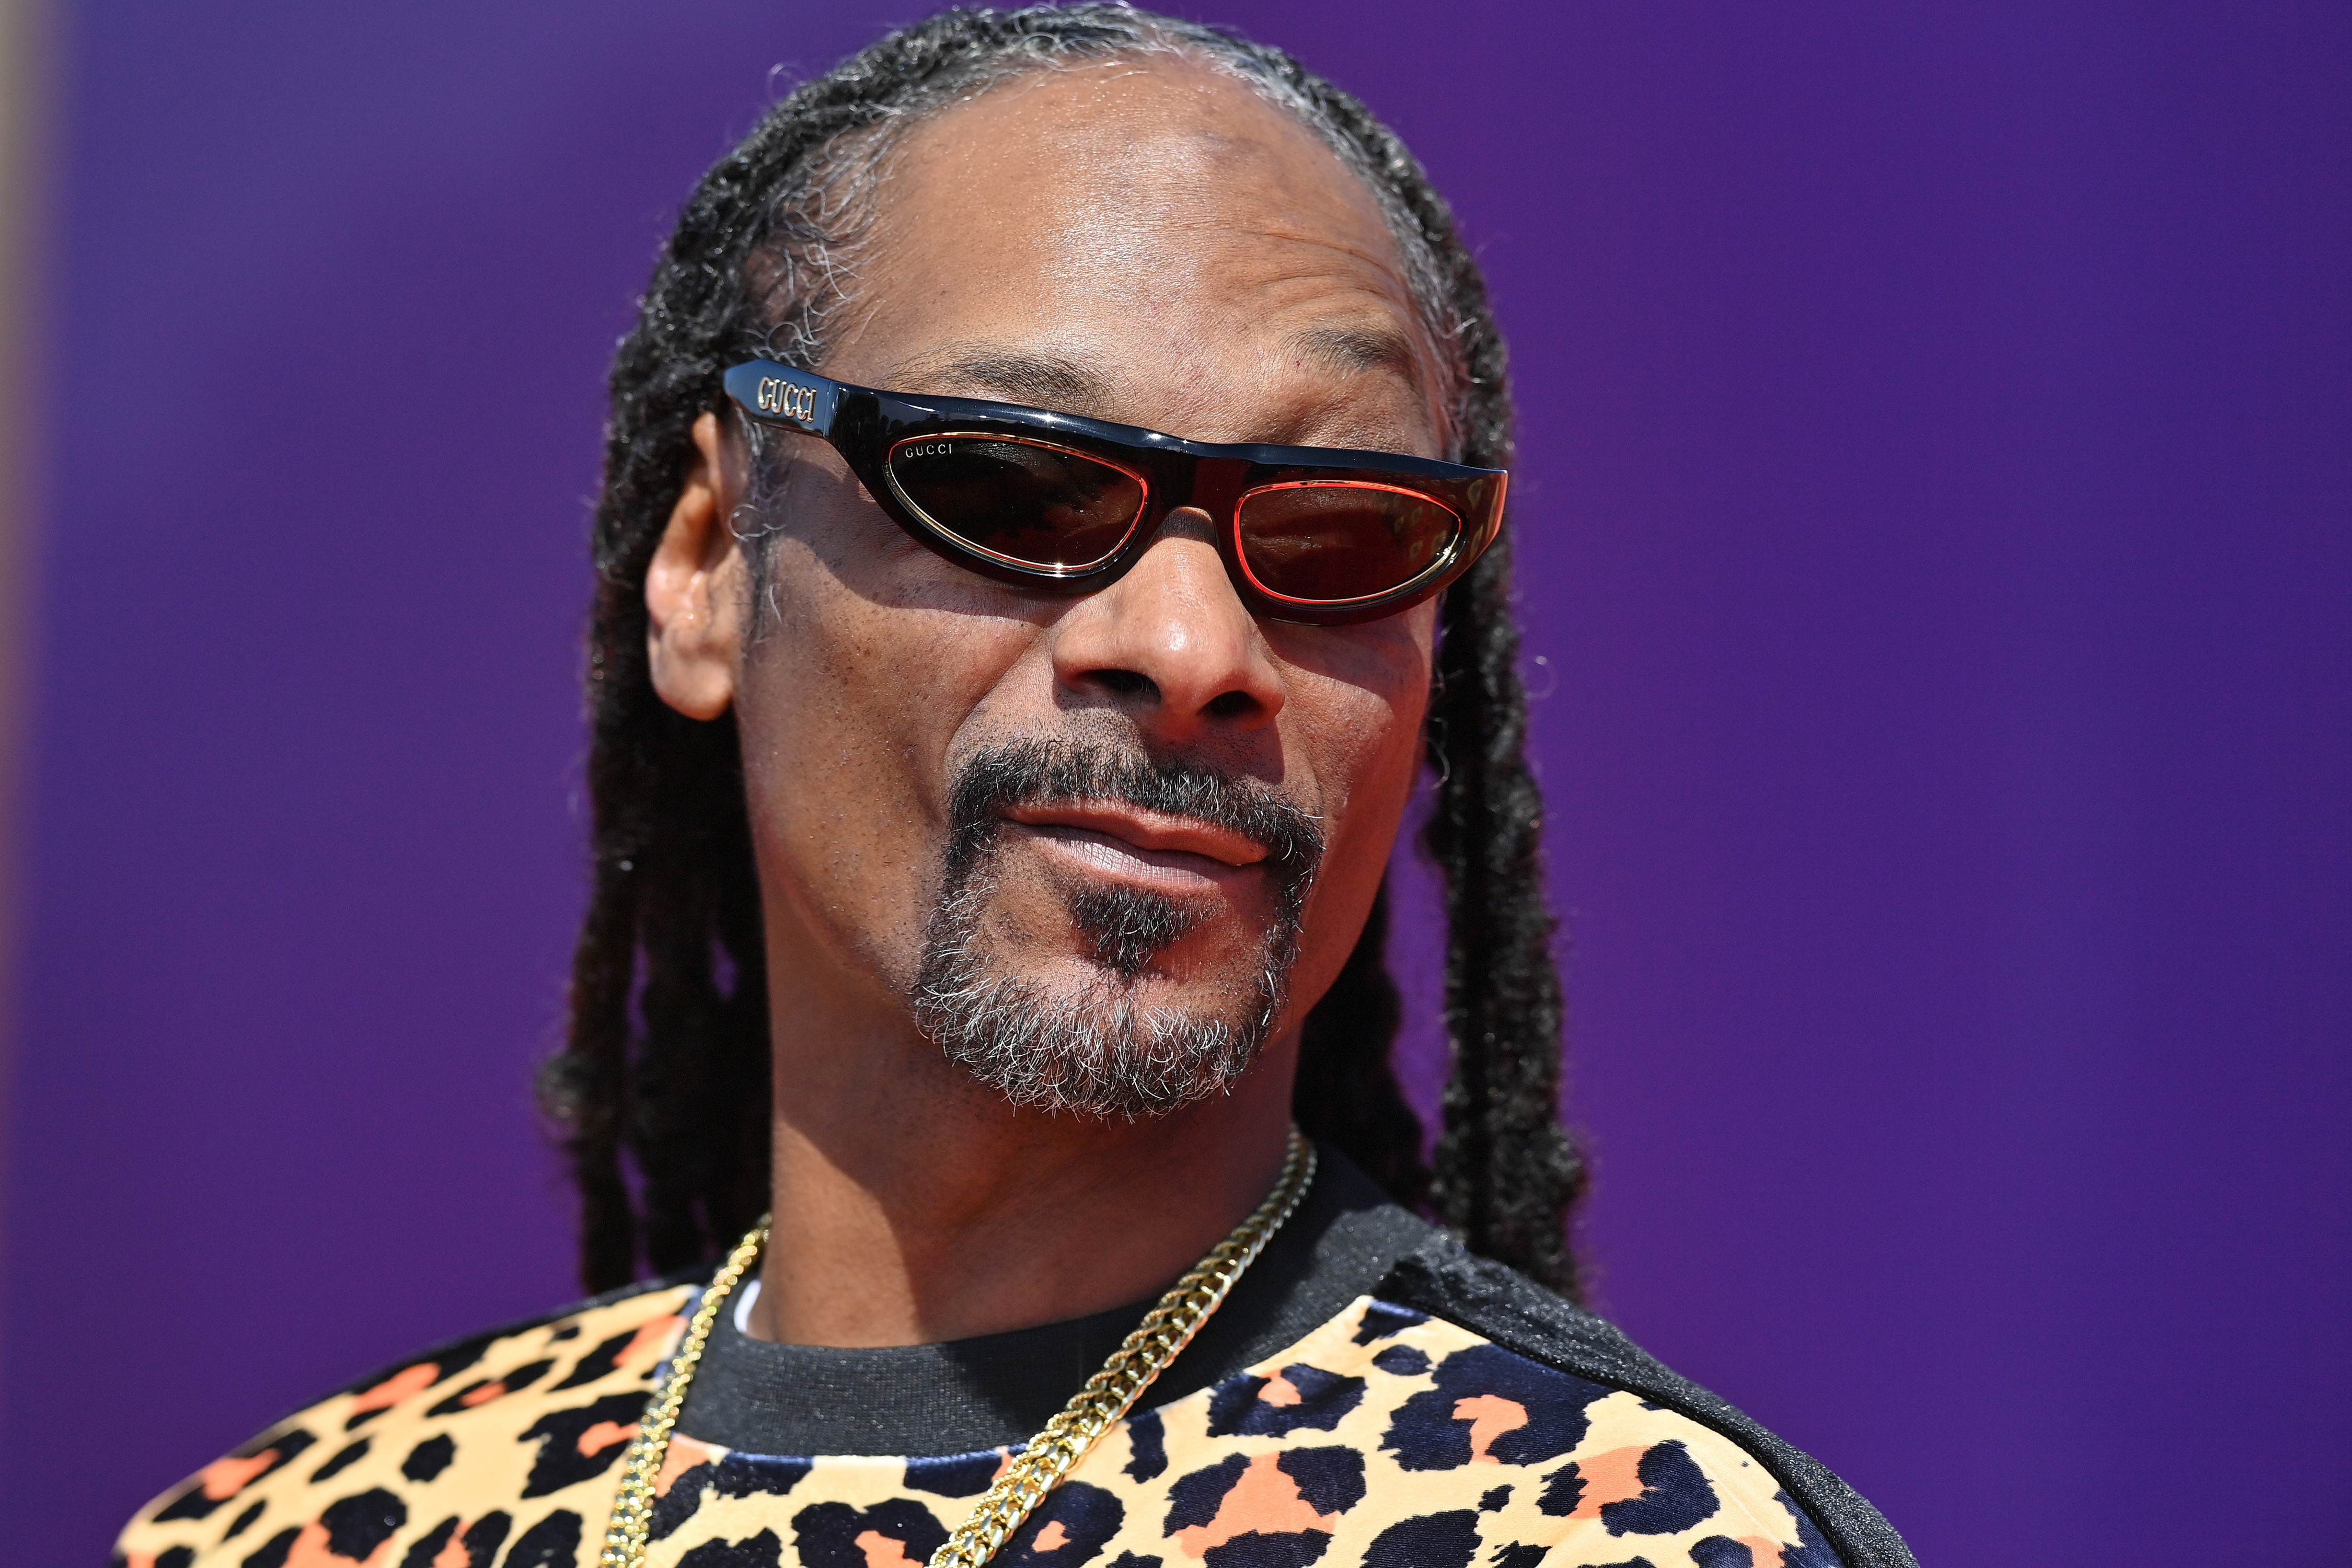 Snoop Dogg Suggests Himself As Elon Musk’s Twitter Replacement